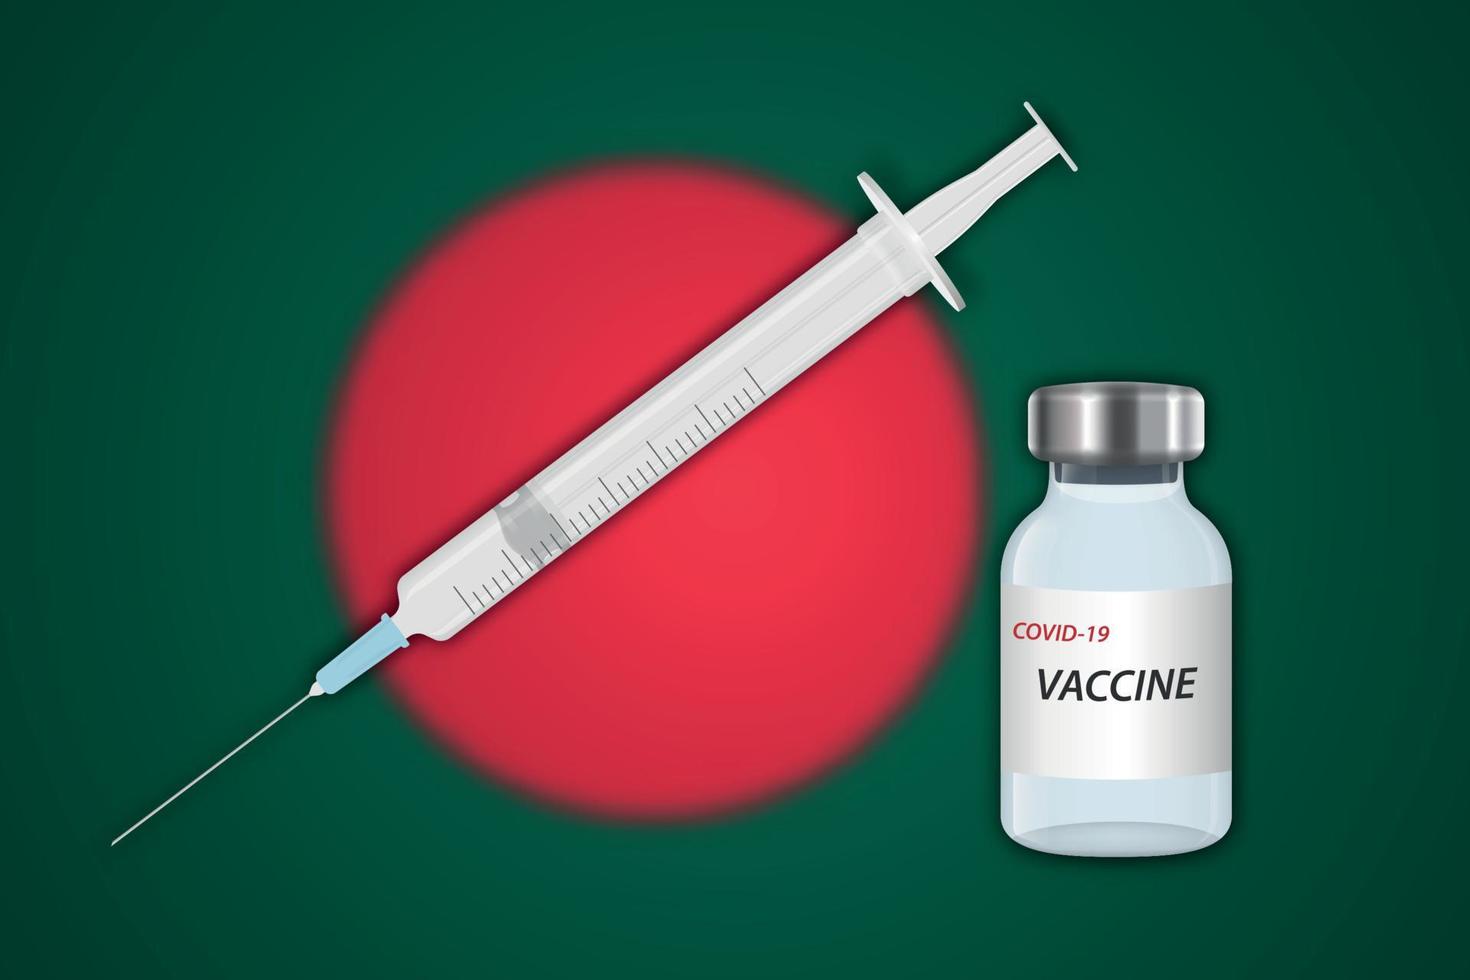 Syringe and vaccine vial on blur background with Bangladesh flag vector